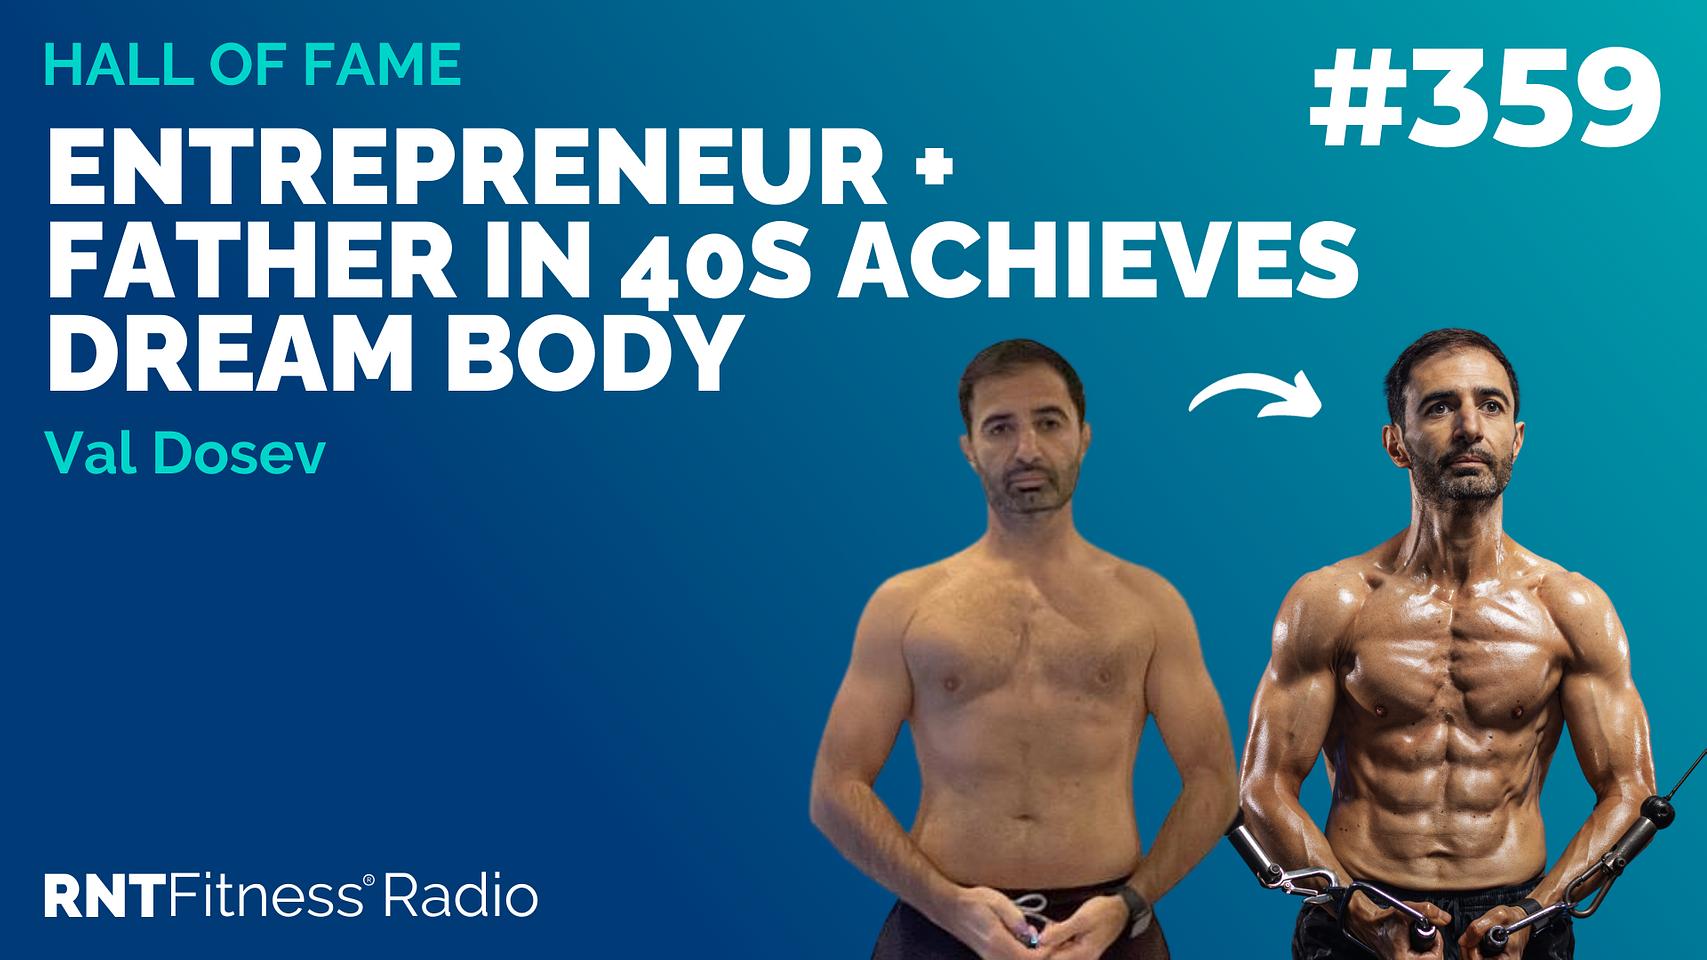 Ep 359 - Hall Of Fame | Val Dosev: After Years Of Inconsistency, This Entrepreneur & Father In His 40s Finally Achieves His Dream Body